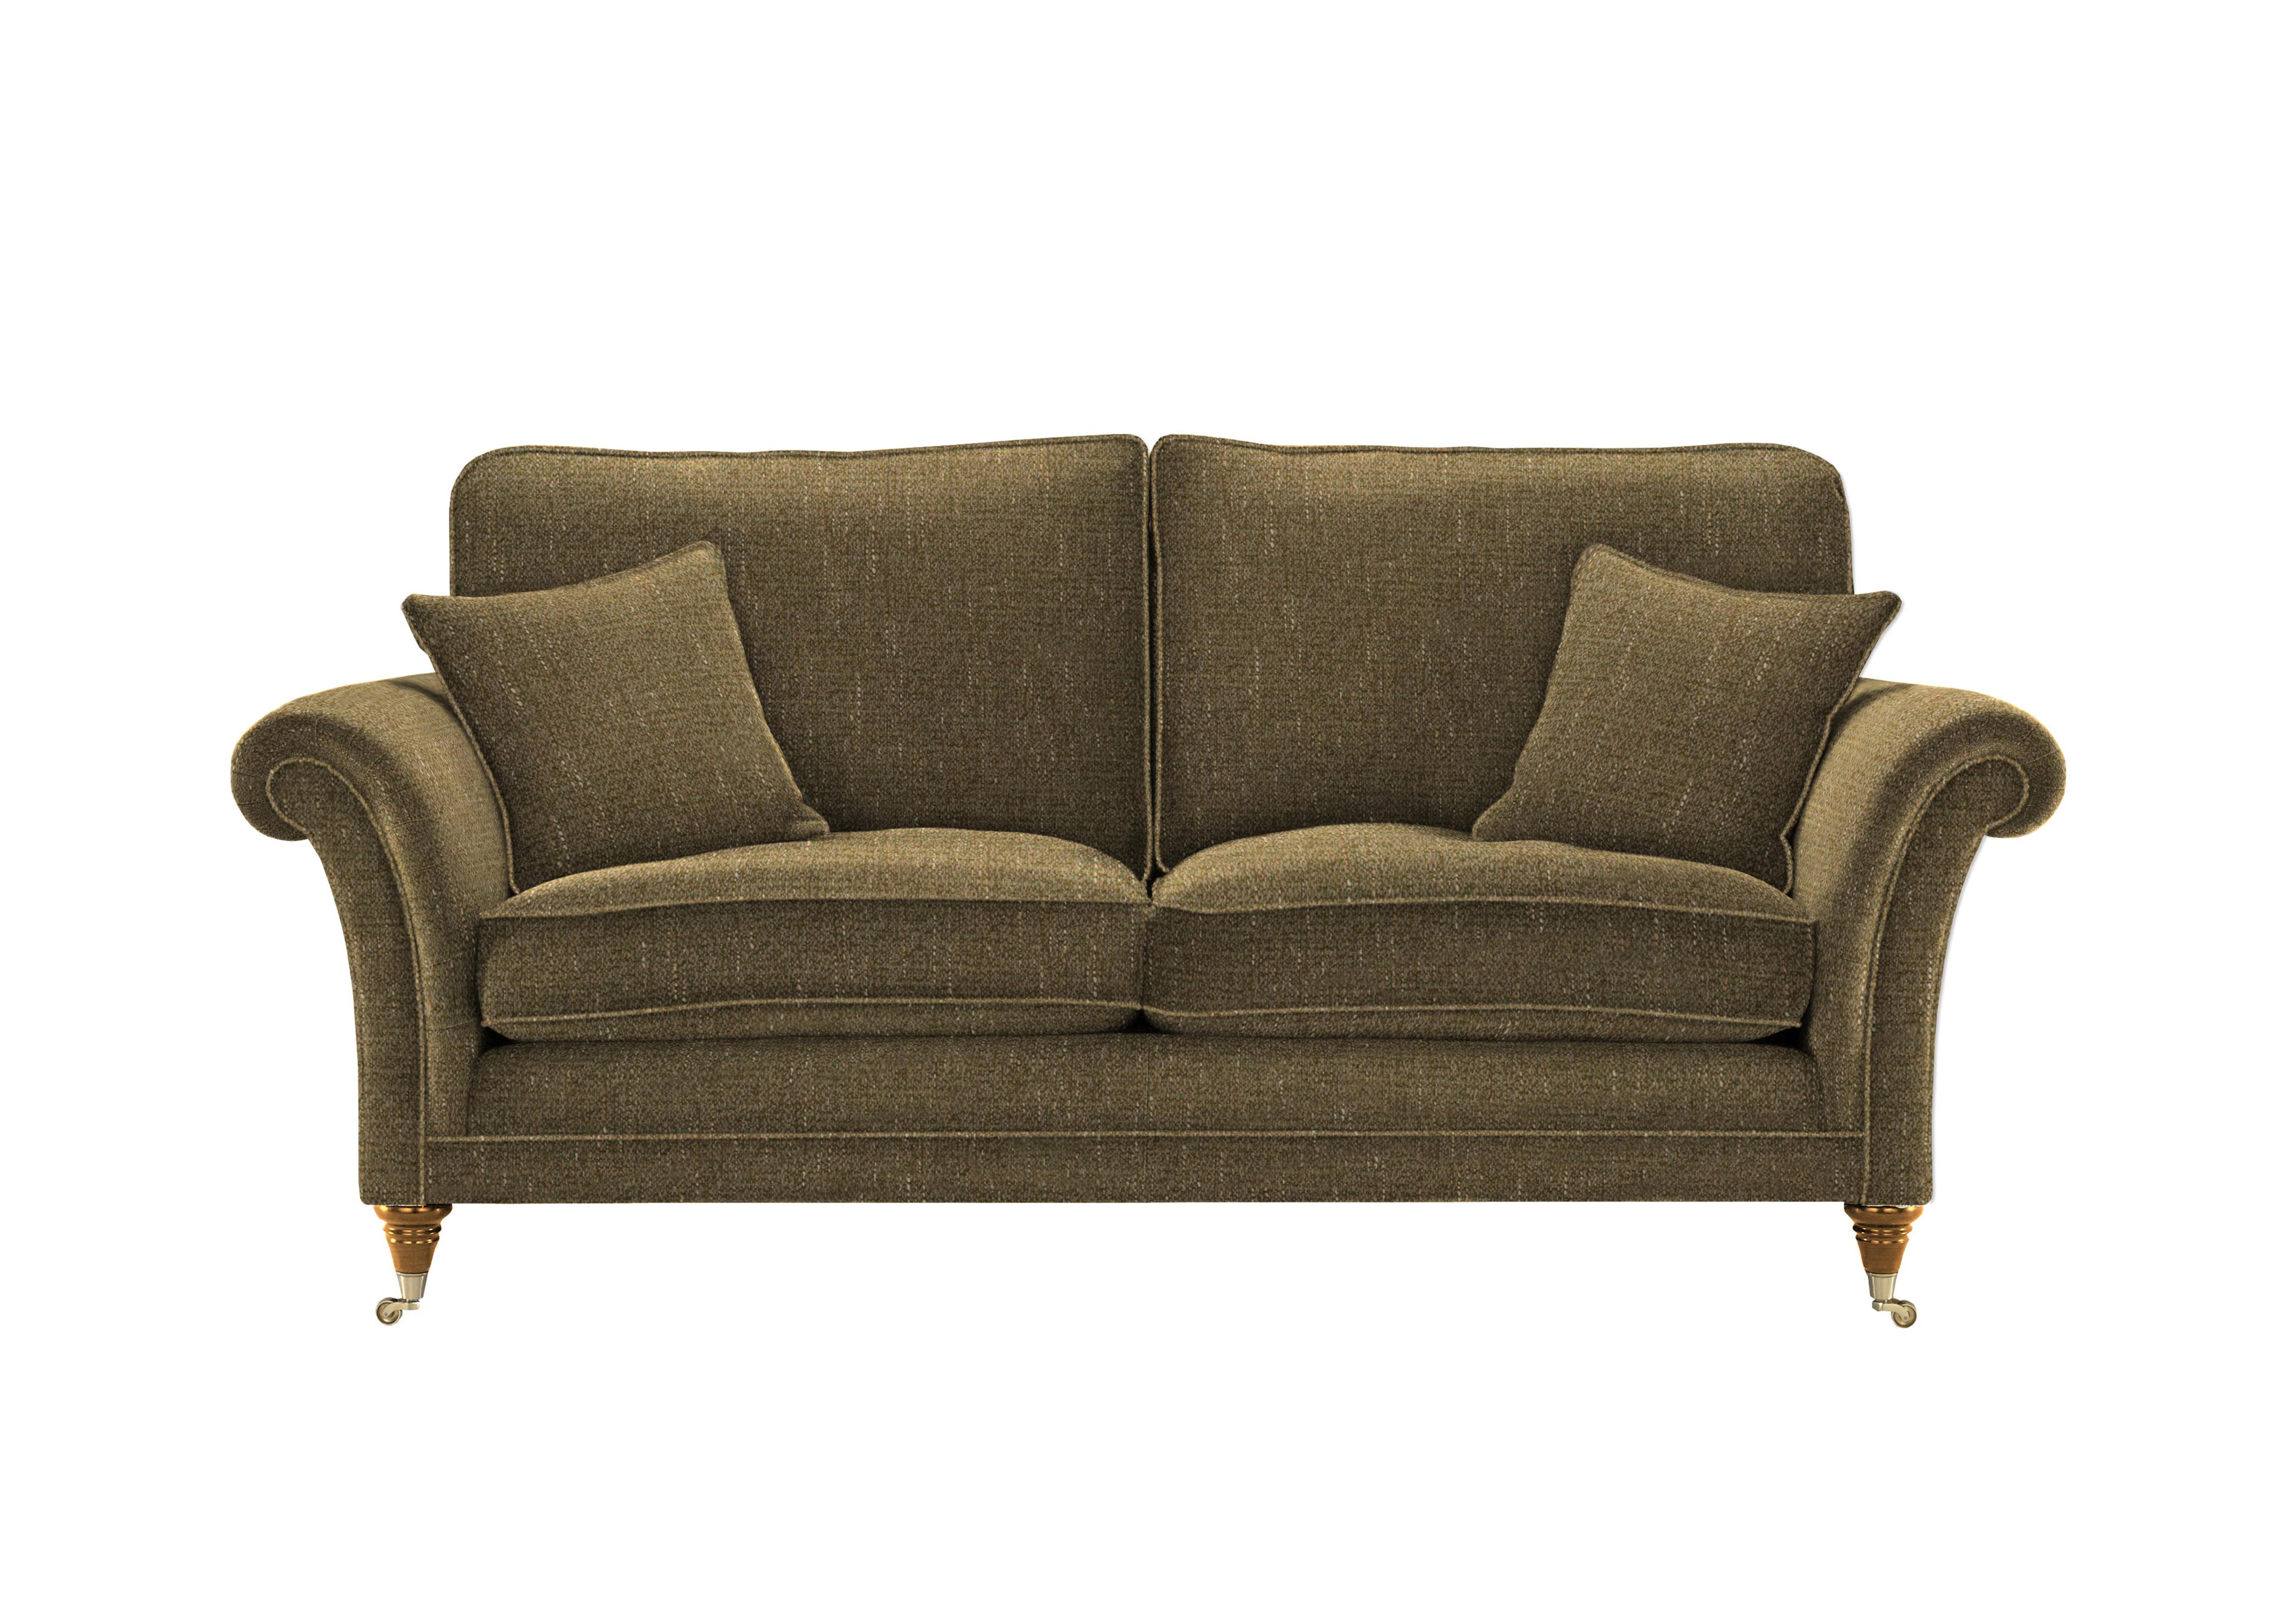 Burghley Large 2 Seater Fabric Sofa in 001408-0065 Country Moss on Furniture Village